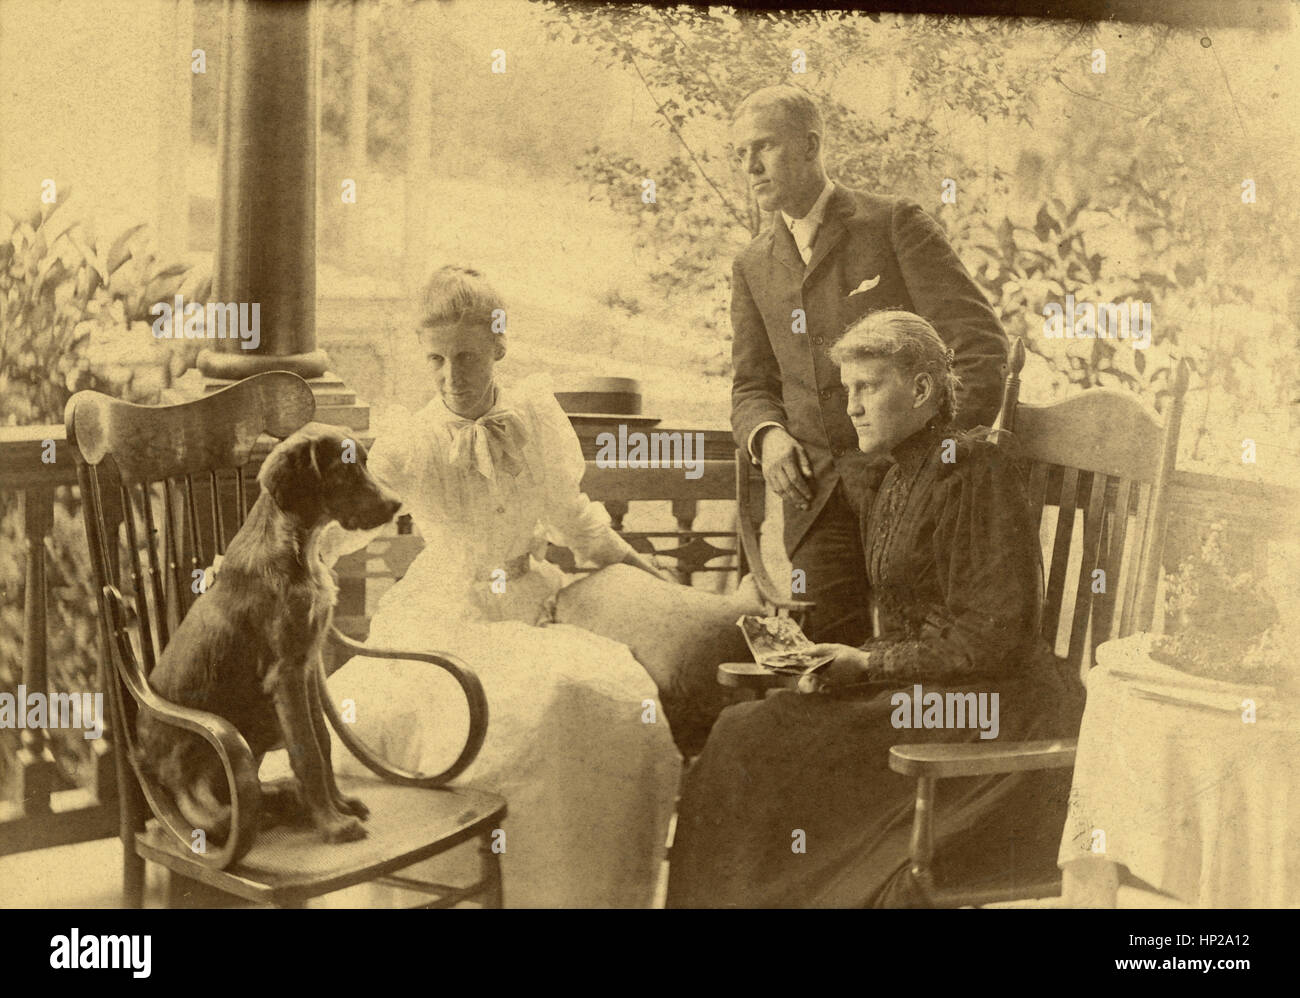 Antique c1890 photograph, group of Victorian adults on porch with dog. Location: New England, USA. SOURCE: ORIGINAL PHOTOGRAPHIC PRINT. Stock Photo